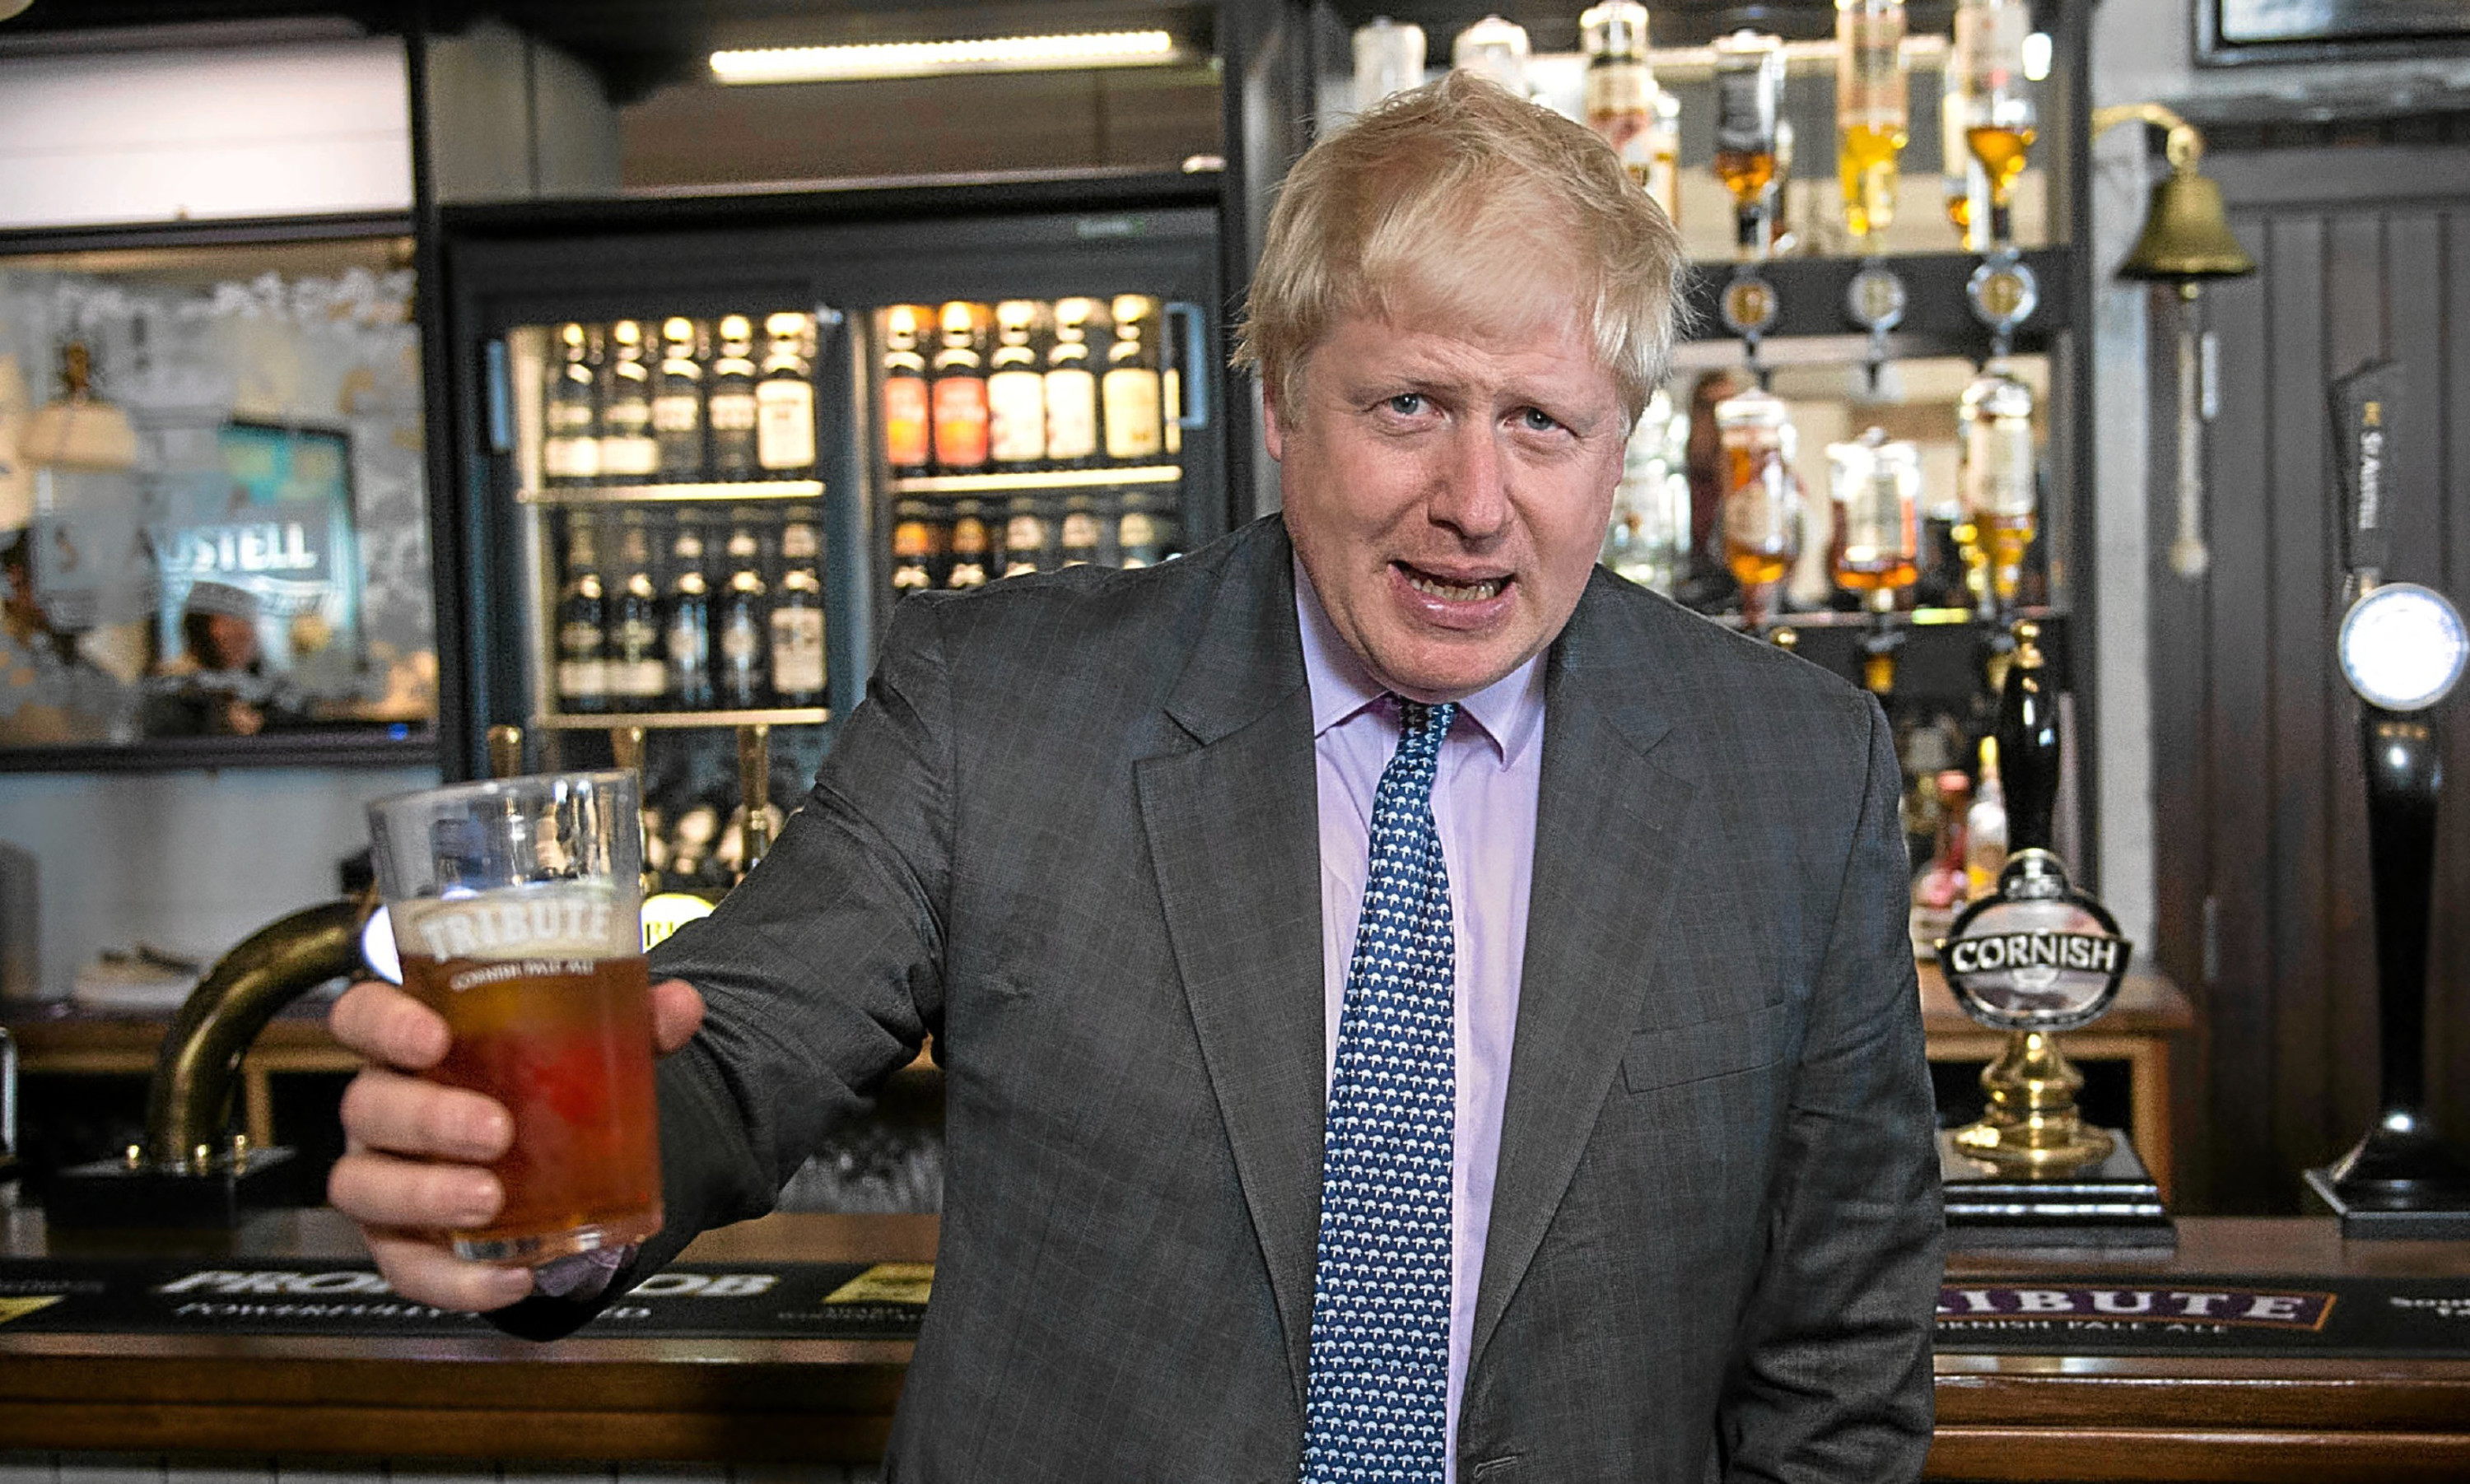 Former Mayor of London Boris Johnson drinks a pint of beer on a visit to the St Austell Brewery in Cornwall, during a Vote Leave campaign visit.